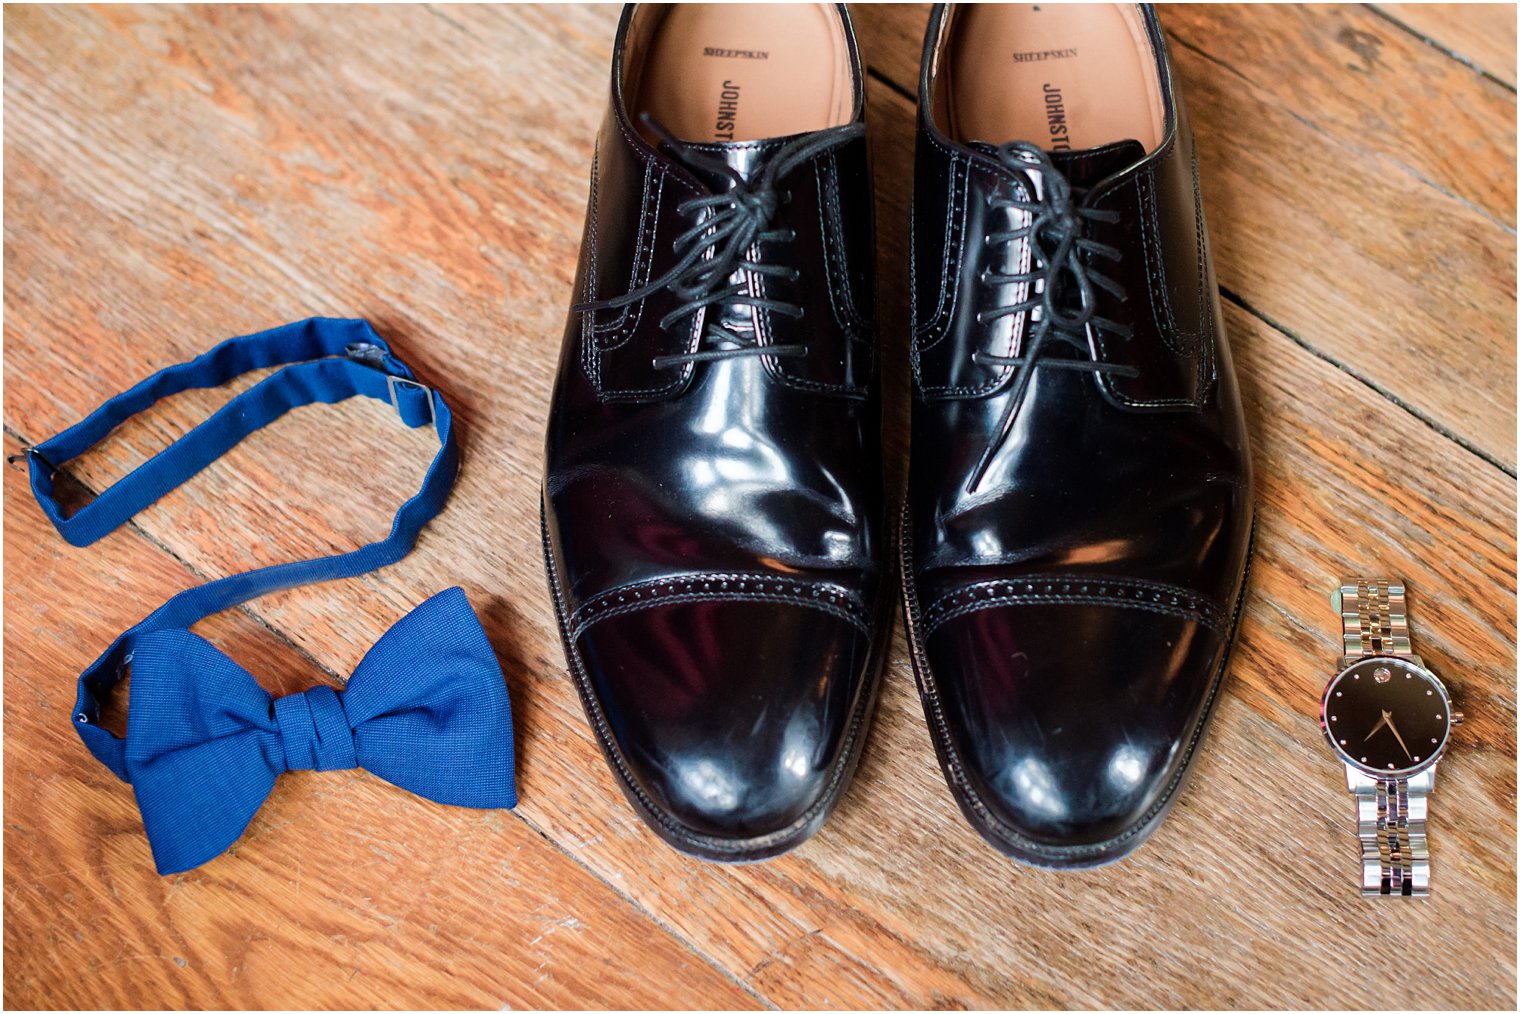 groom's shoes, bow tie, and watch